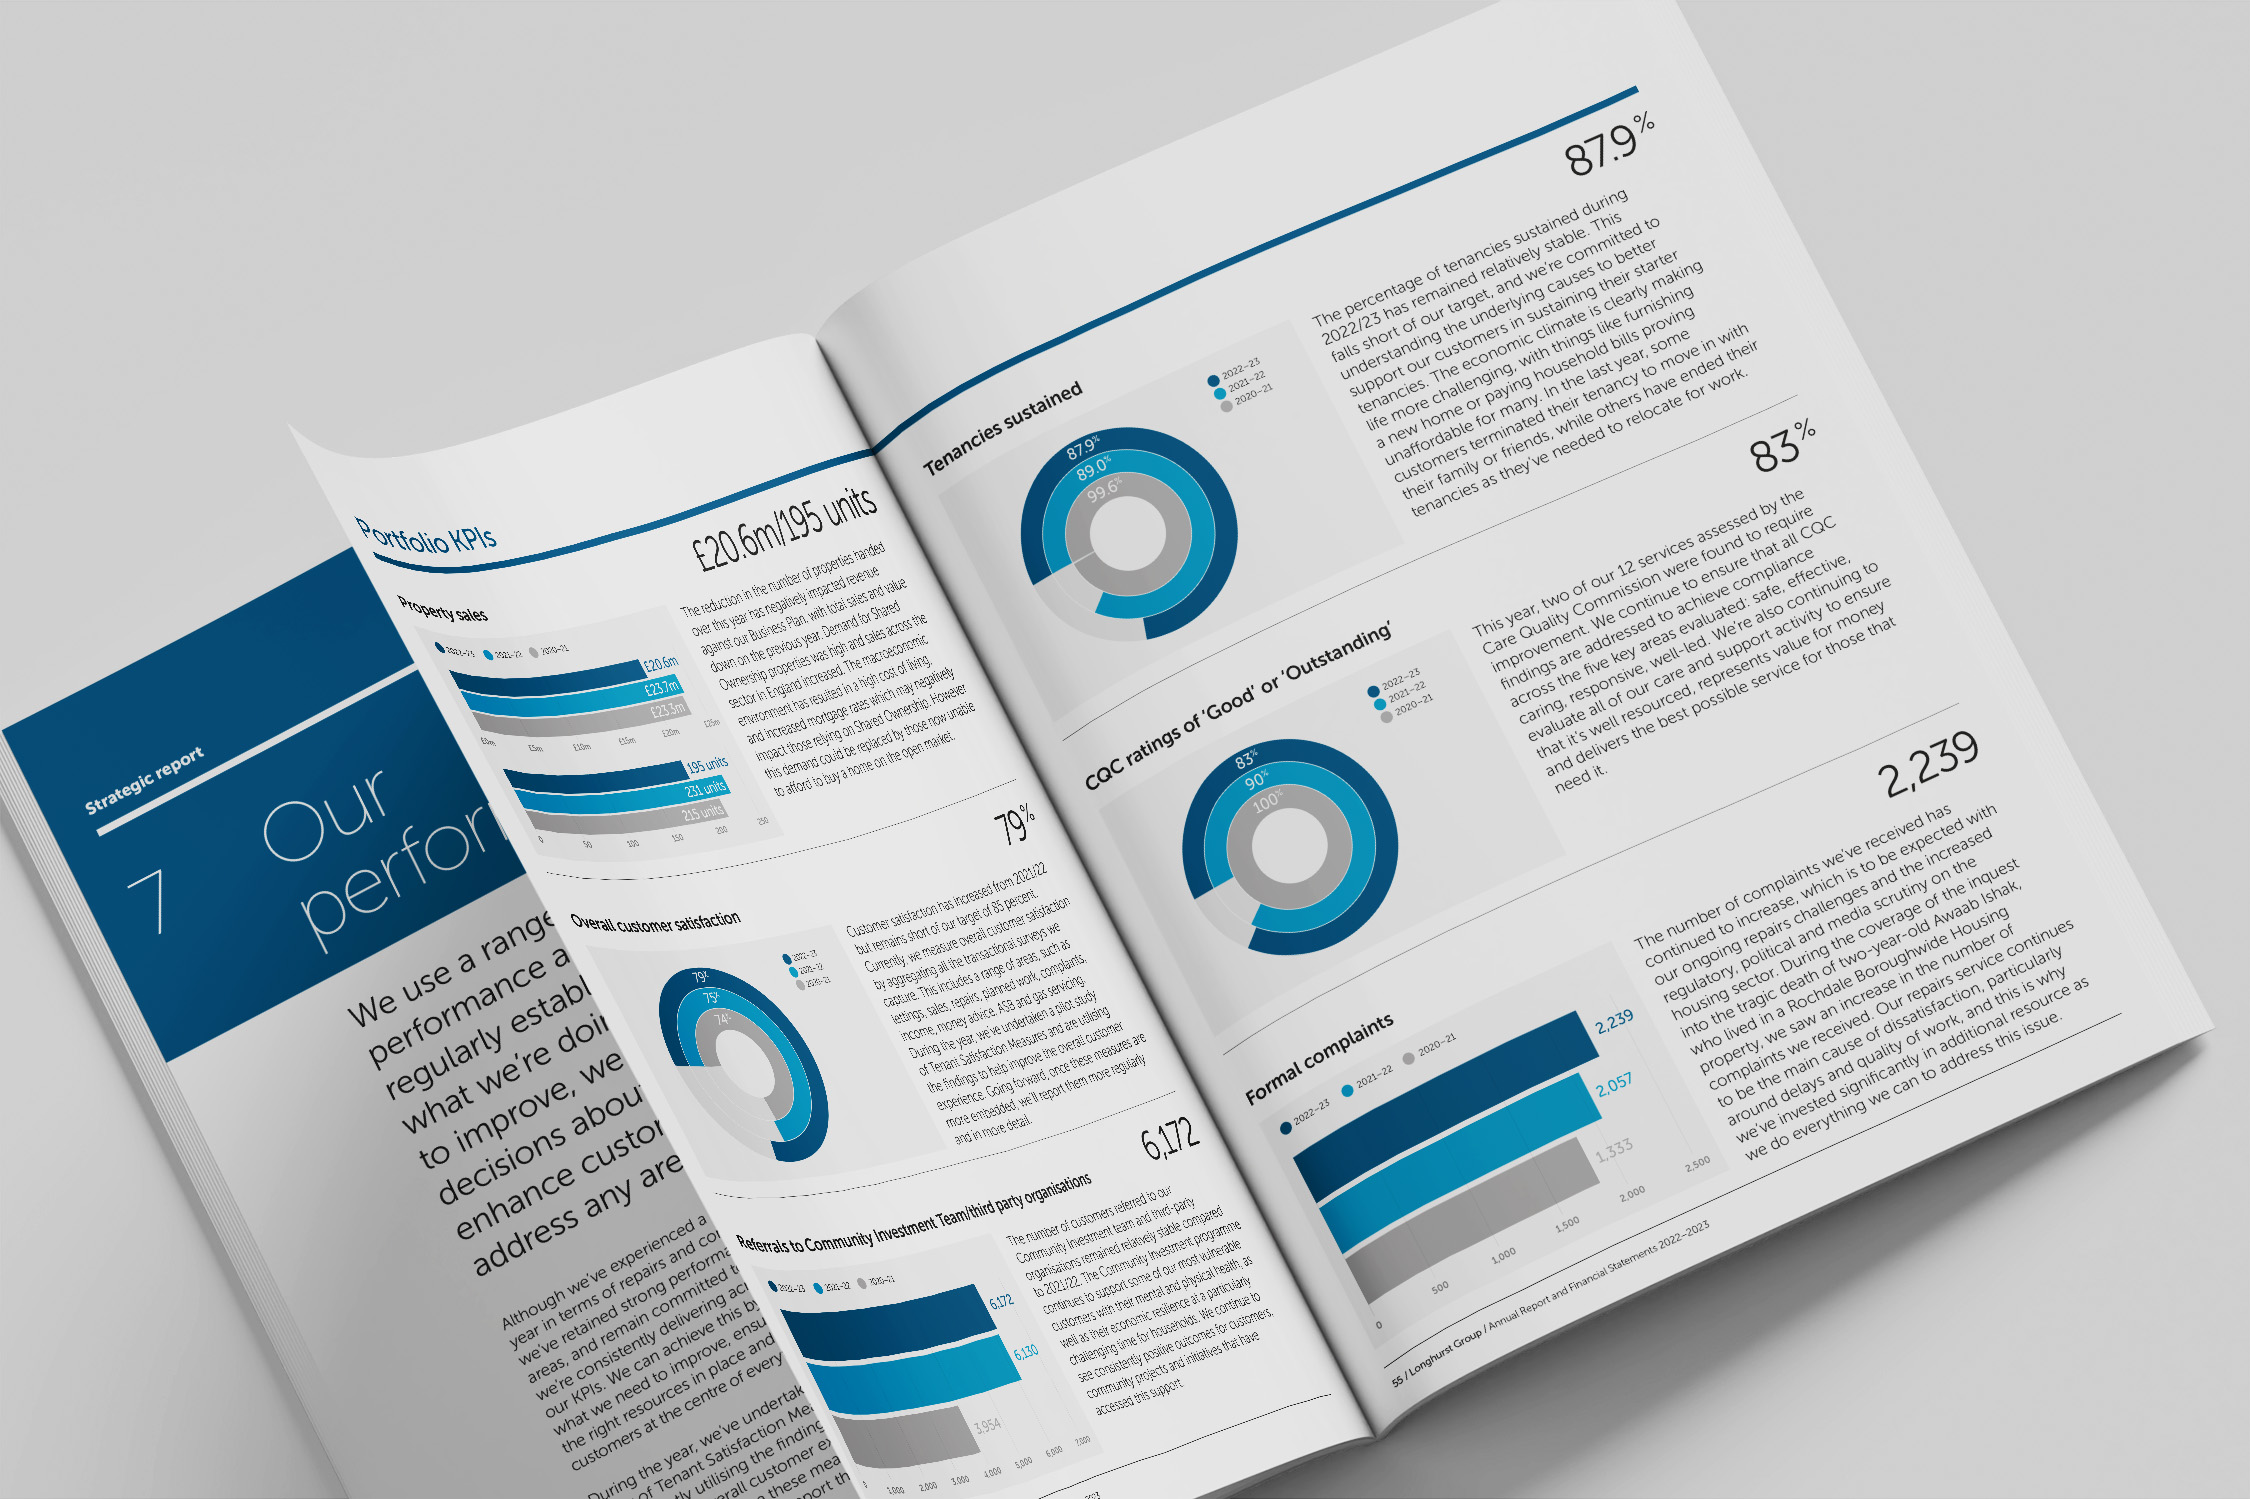 Double page spread from print version of Longhurst Group's 2022/23 Annual Report. The spread shows various charts and headline figures from the Group's KPIs – the charts have a consistent turquoise and grey colour scheme.